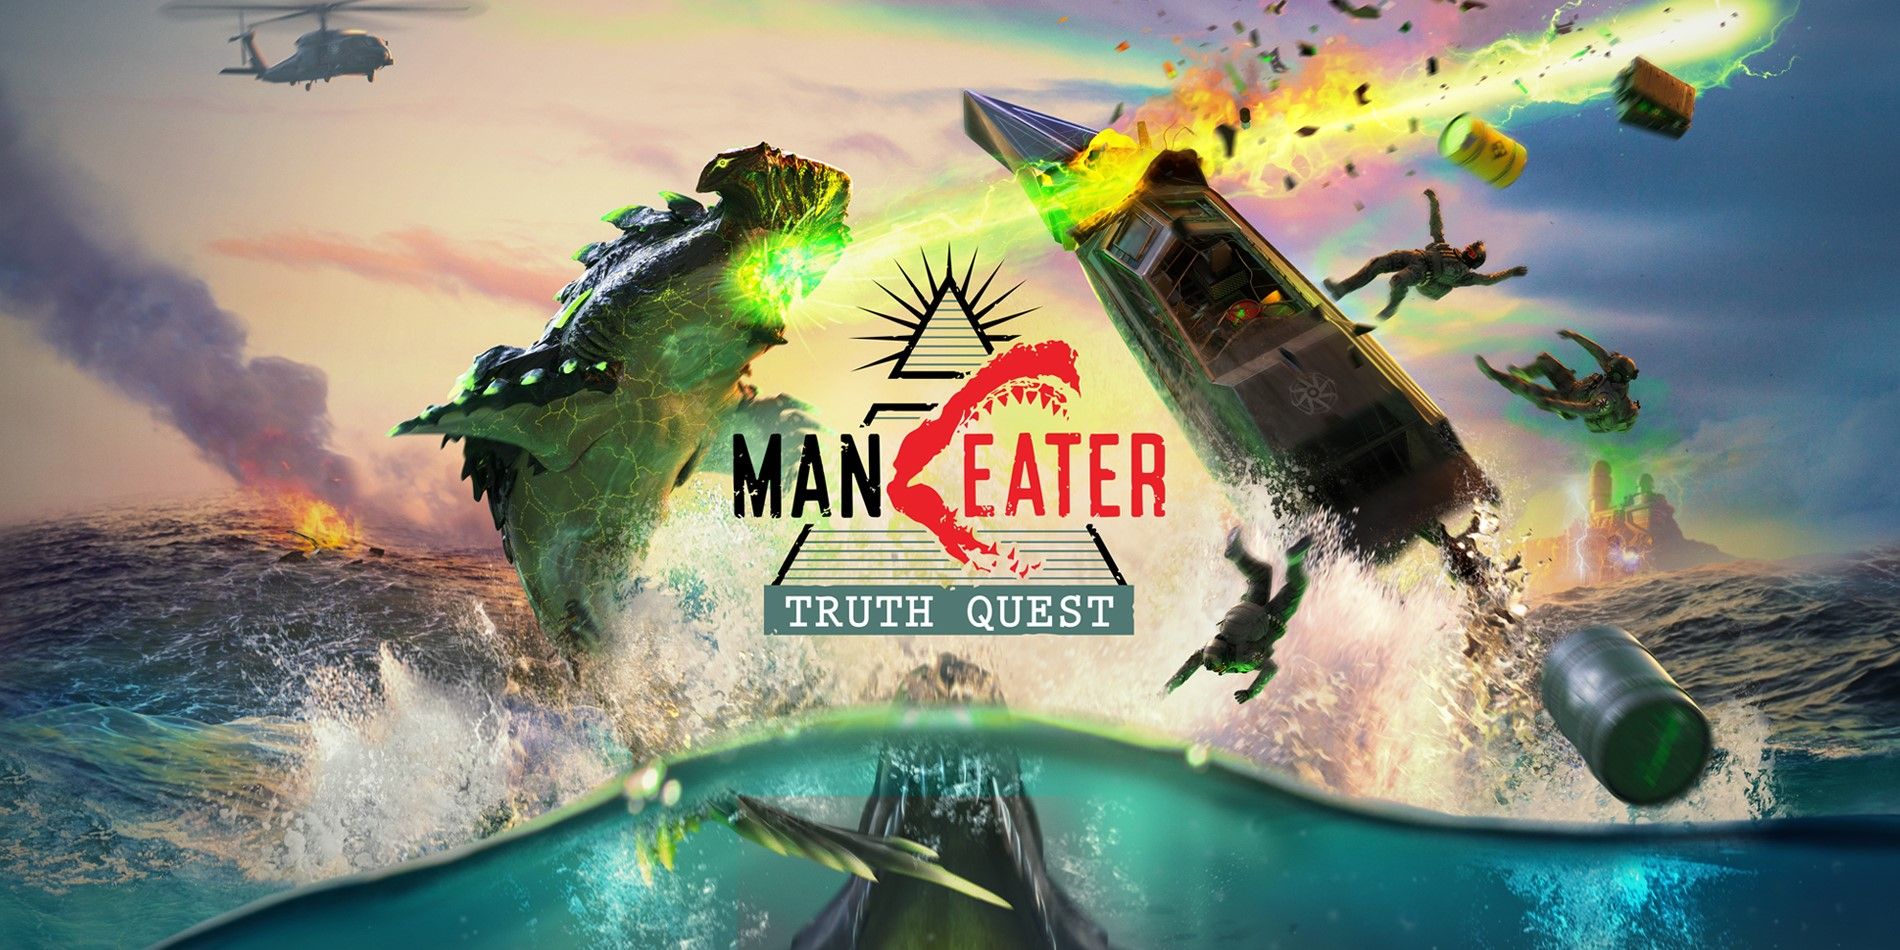 Maneater Truth Quest Key Art with flying laser shark